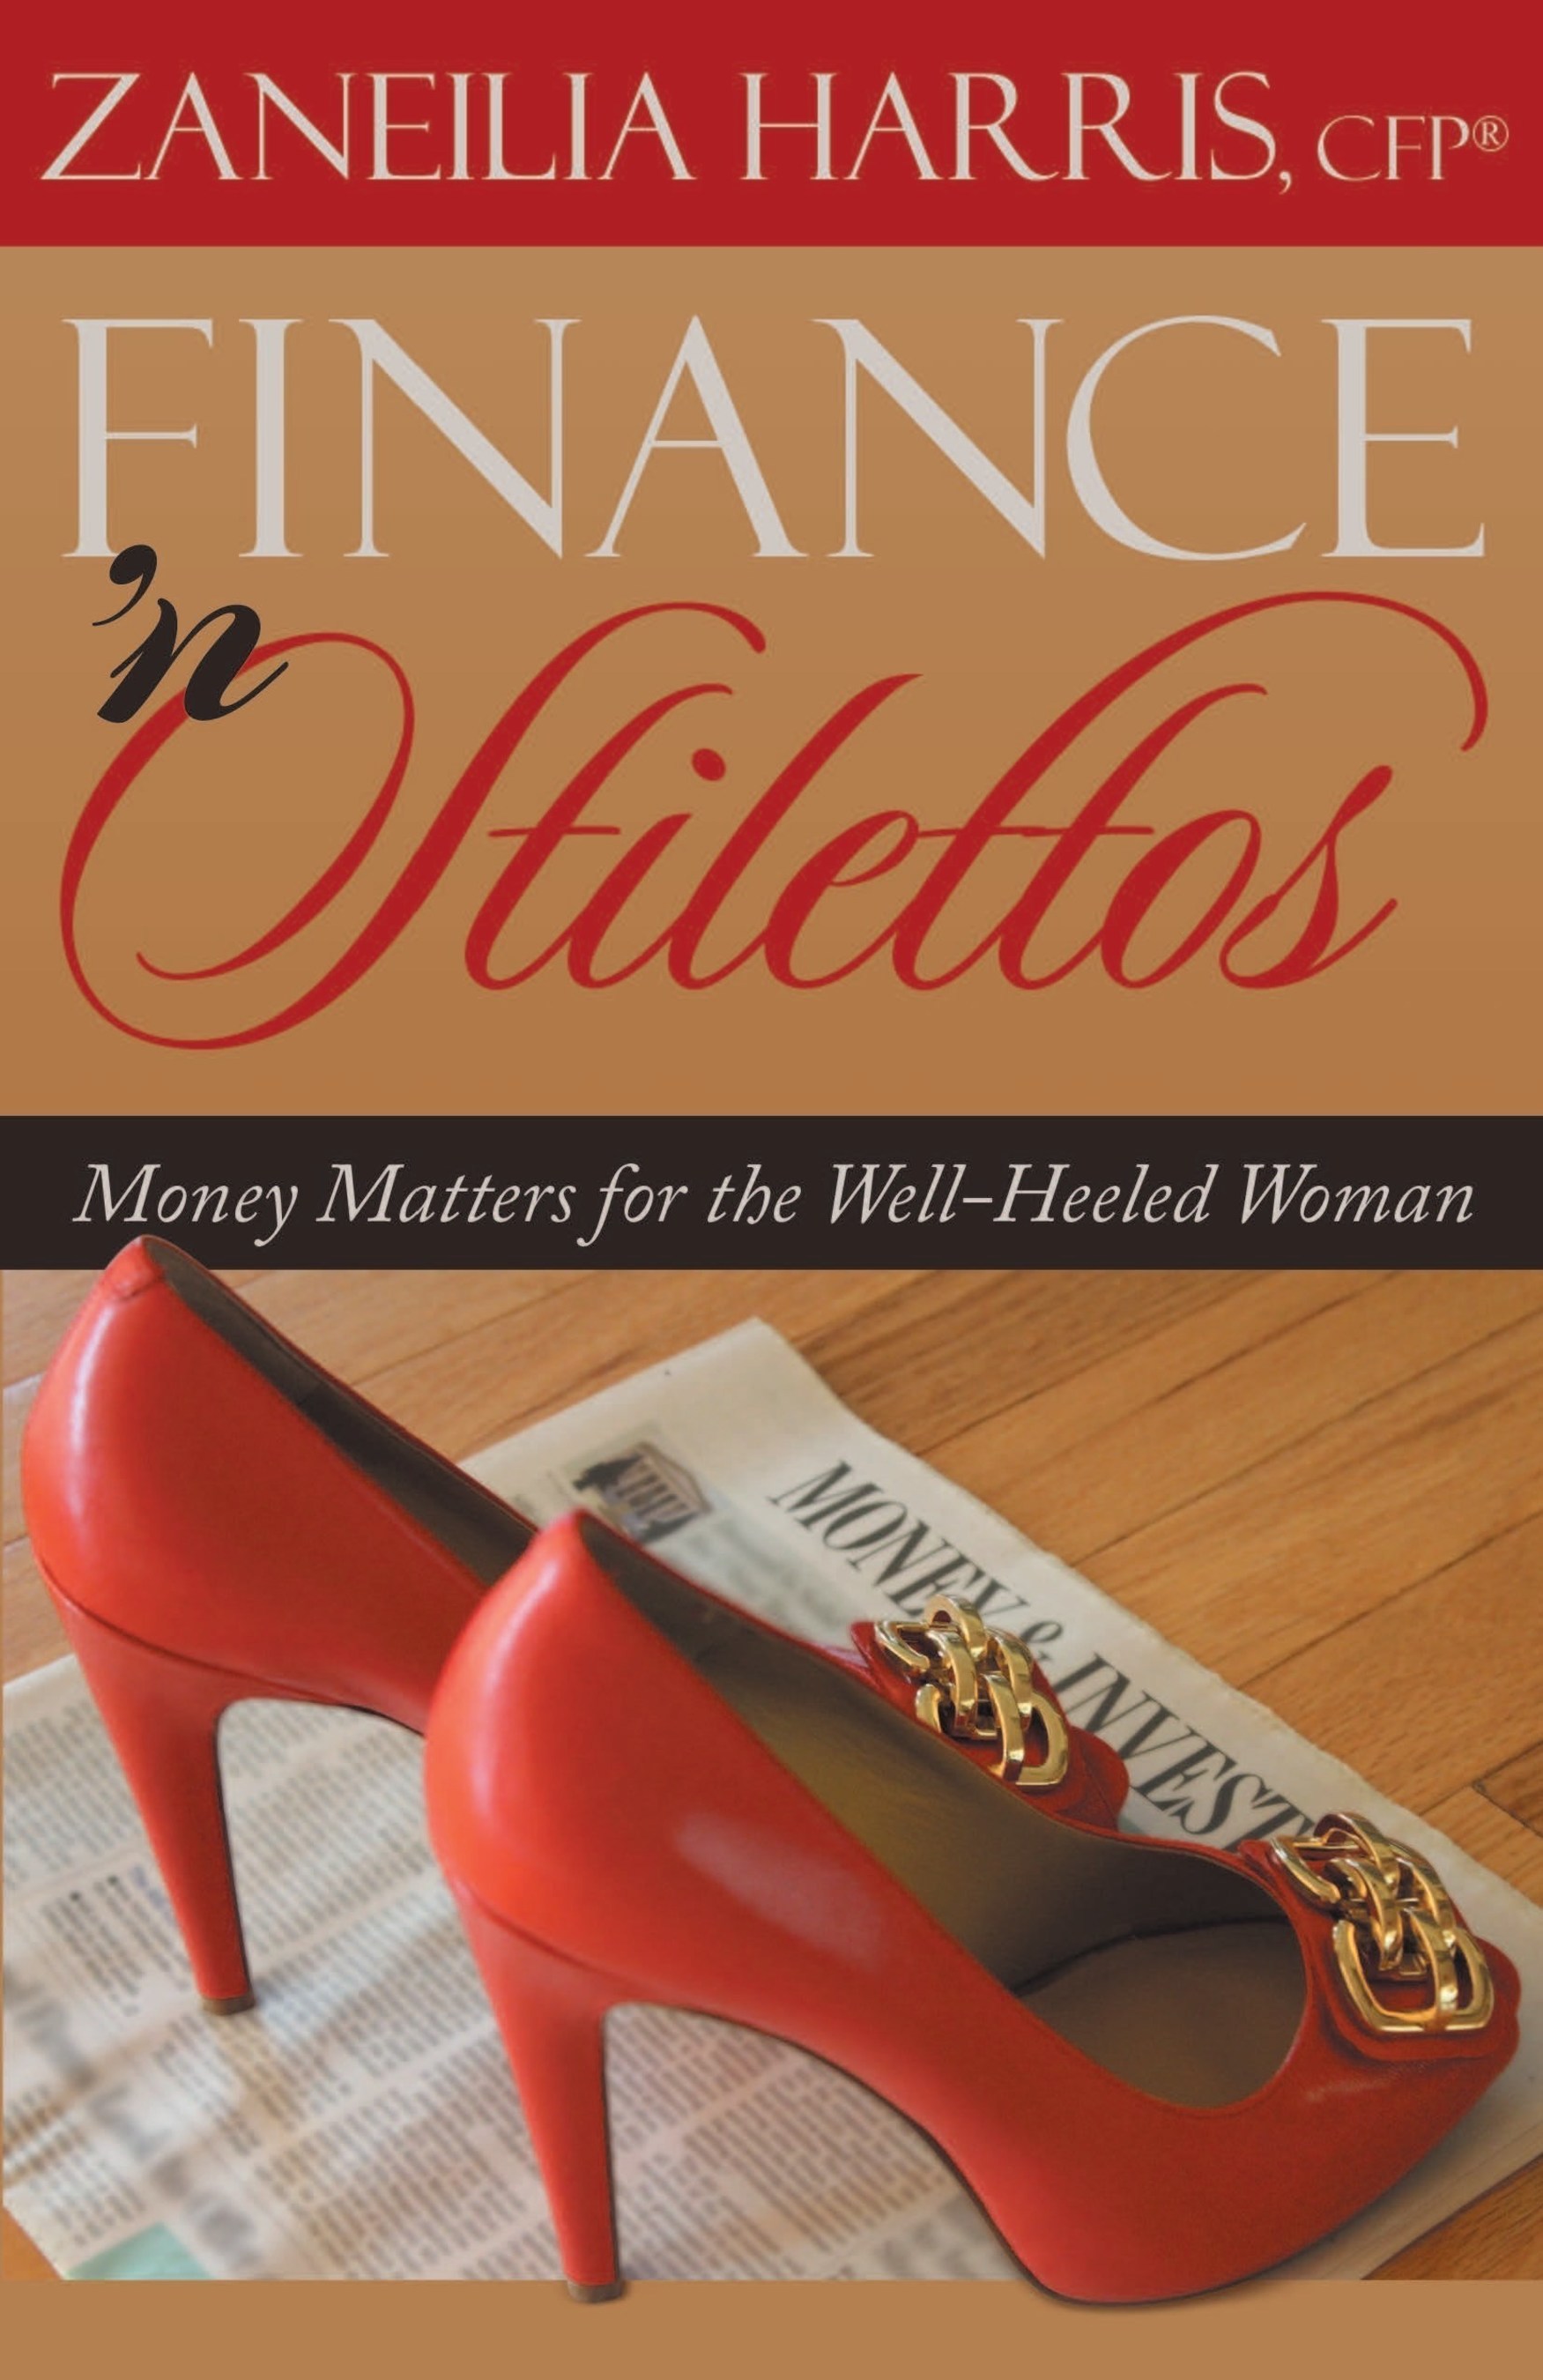 Finance 'n Stilettos: Money Matters for the Well-Heeled Woman by Zaneilia Harris, president of Harris and Harris Wealth Management Group